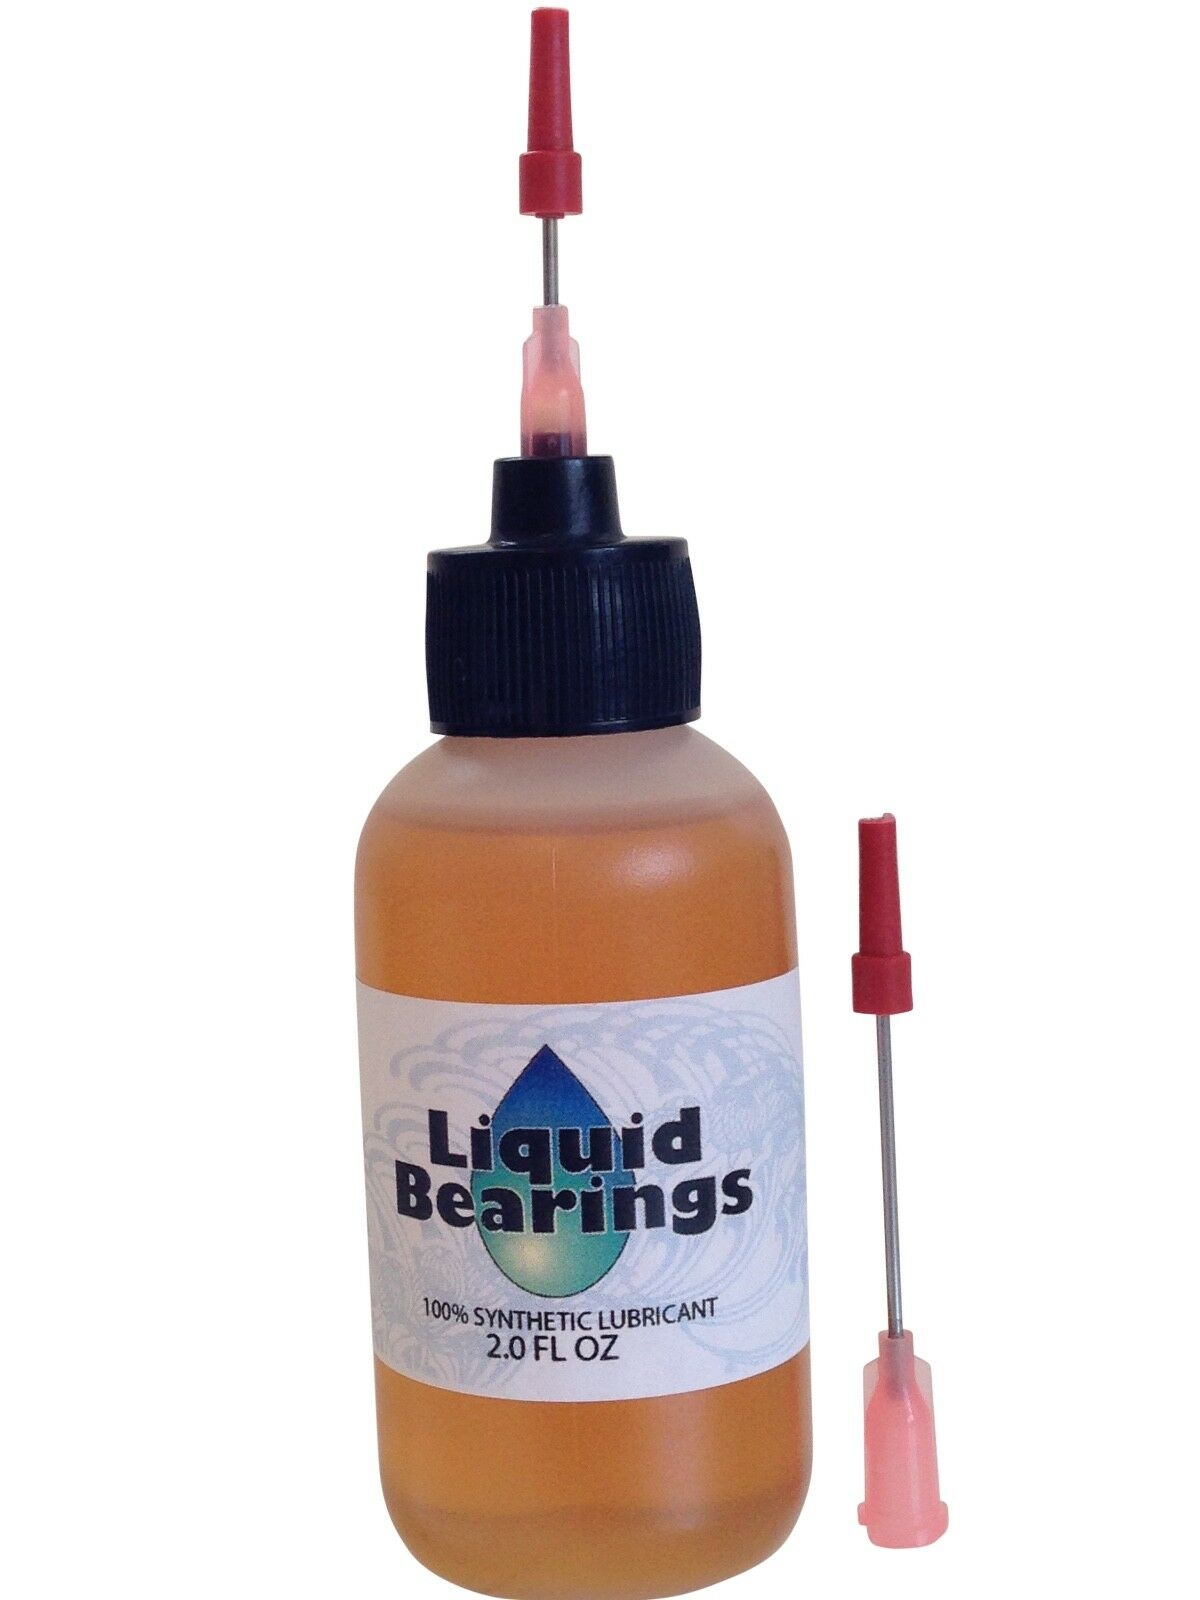 Large 2 Oz Bottles Of Liquid Bearings, Best All-purpose 100%-synthetic Lubricant